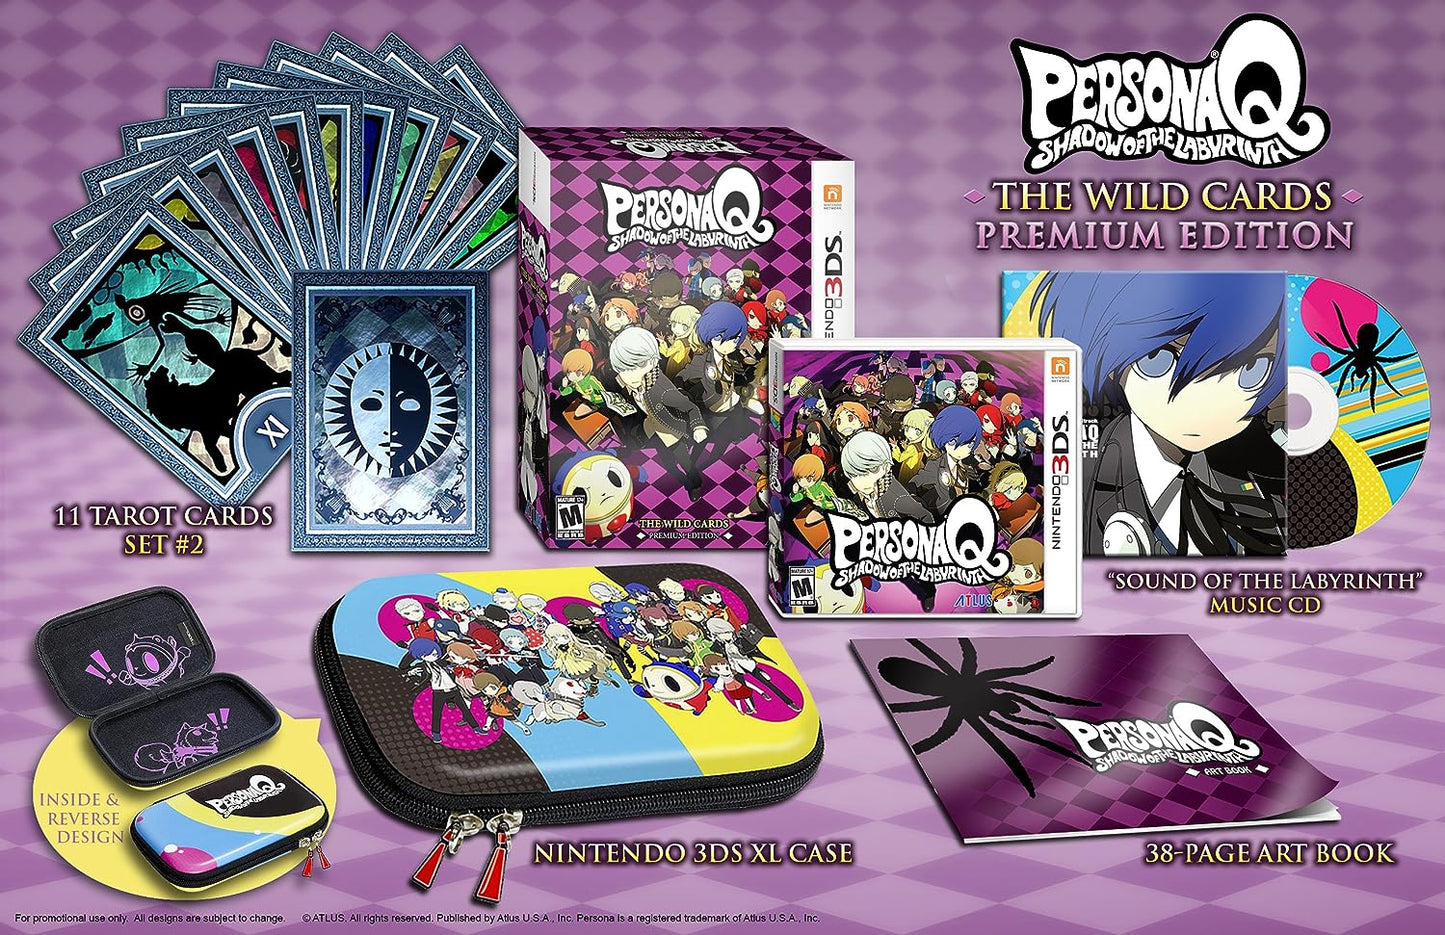 Persona Q: Shadow of the Labyrinth: Wild Cards Premium Edition (Nintendo 3DS)